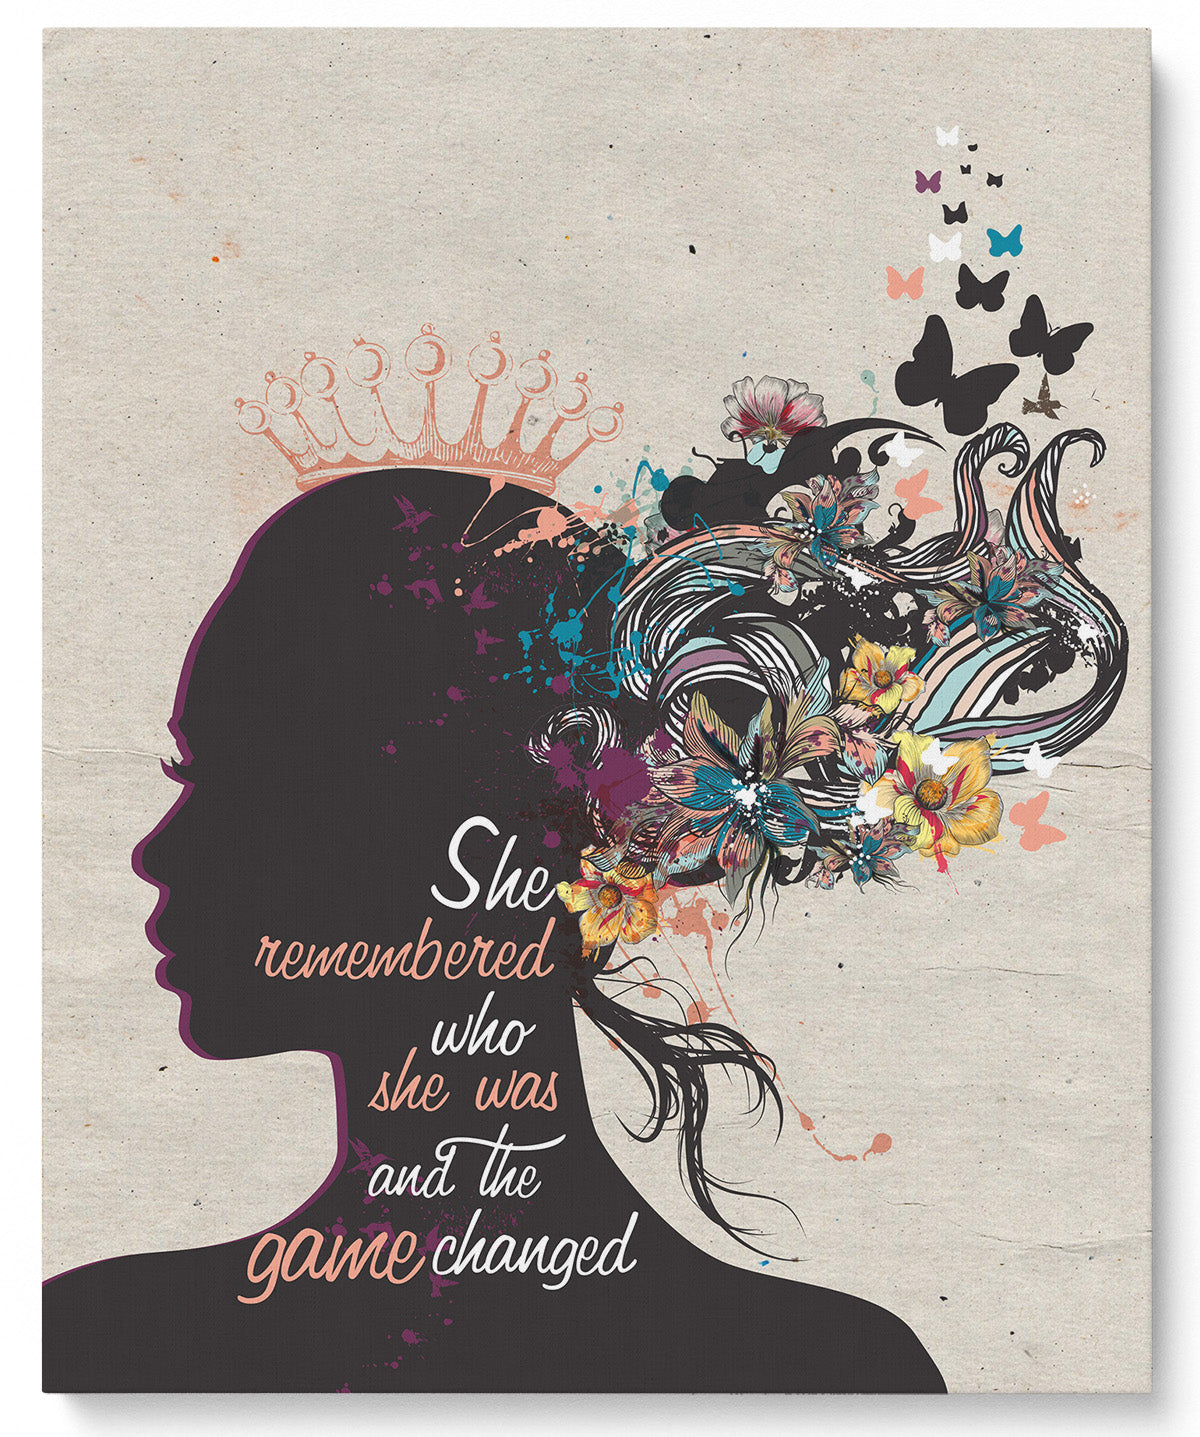 She Remembered Who She Was and The Game Changed Inspirational Wall Art - Positive Affirmations Wall Decor for Women Girls Teens Daughter - Uplifting Aesthetic Home Decor